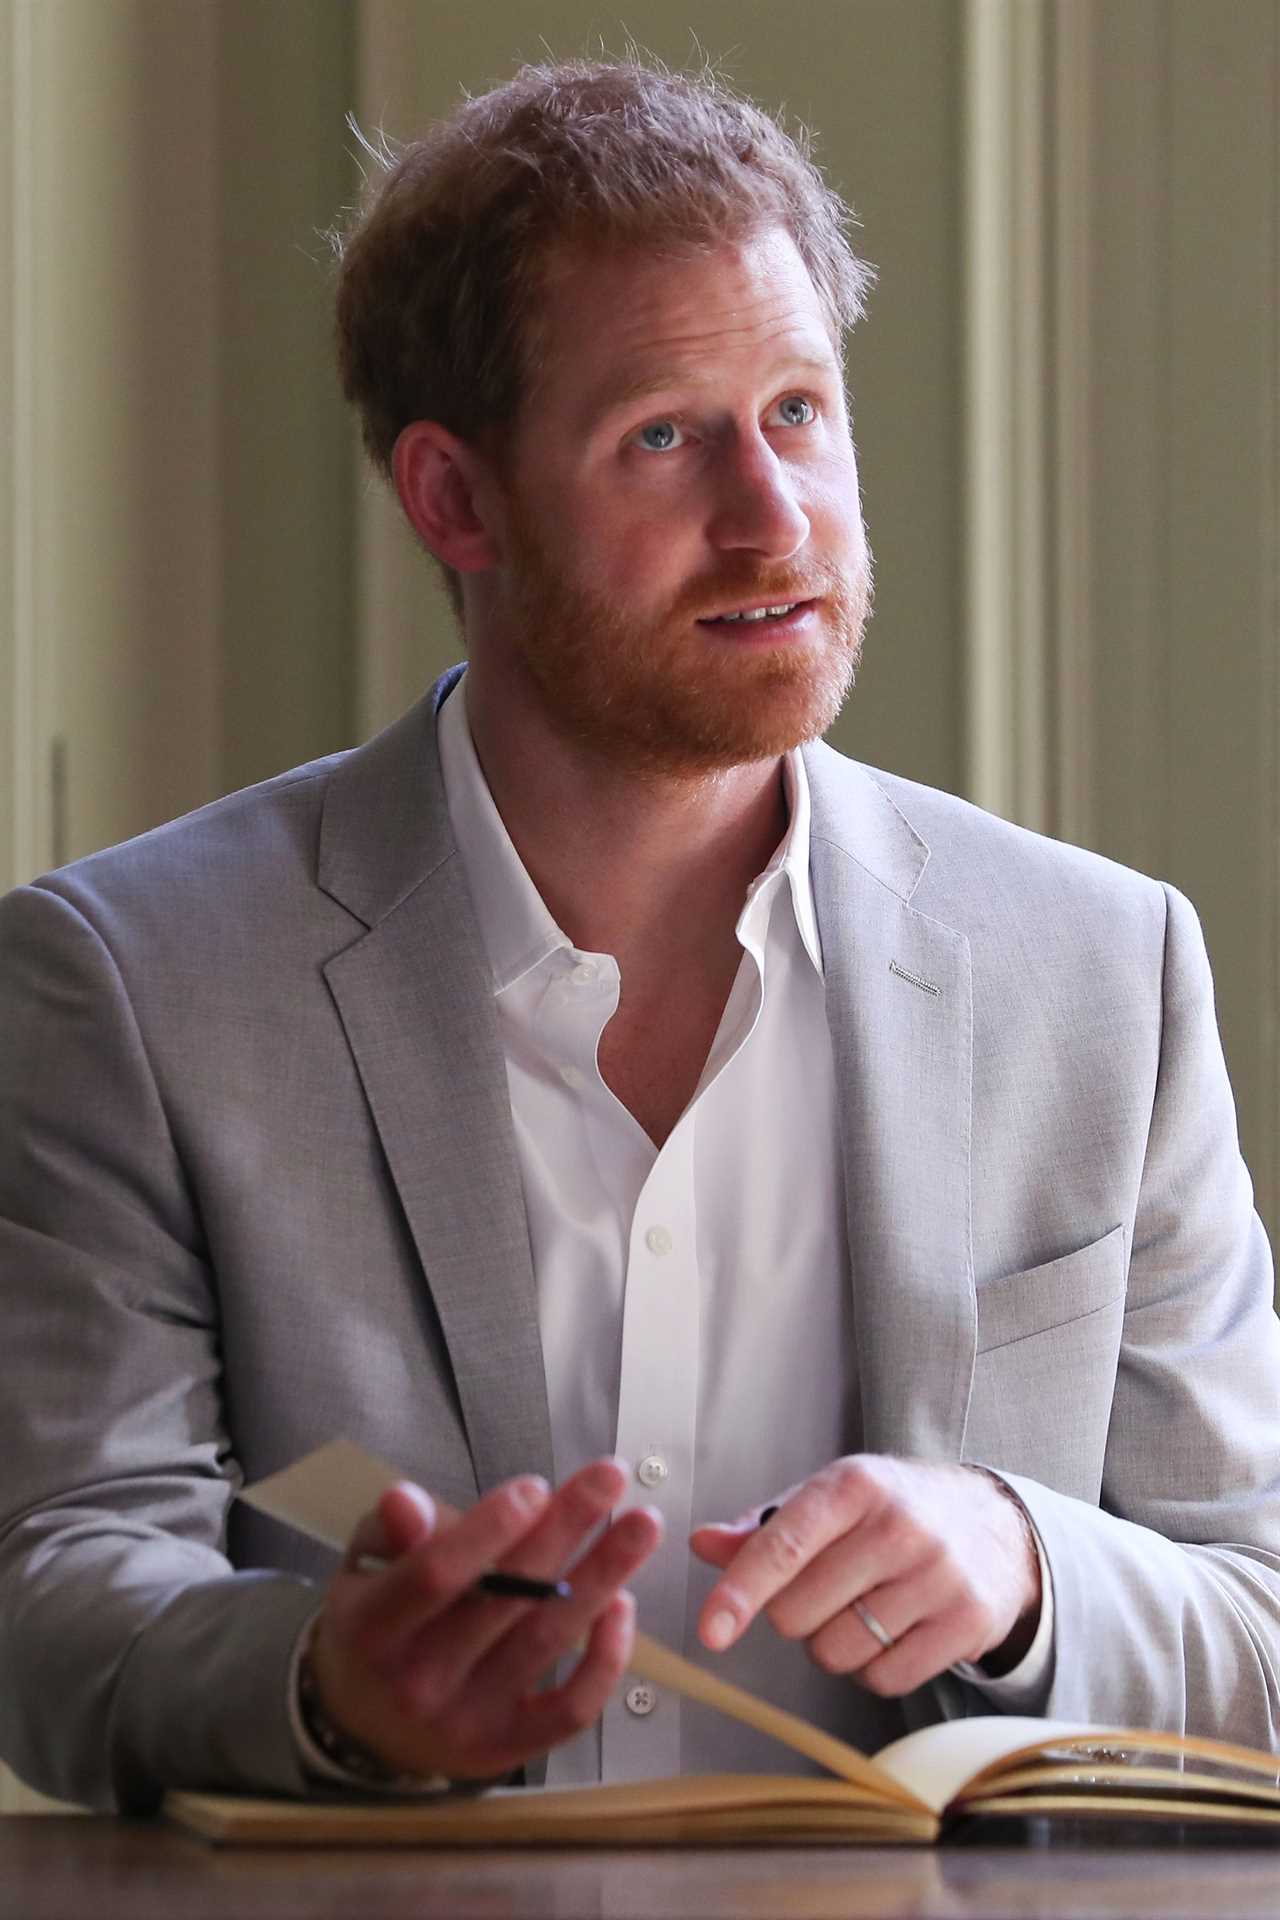 Prince Harry is to reveal the 'highs and lows' of life as a royal in a tell-all memoir